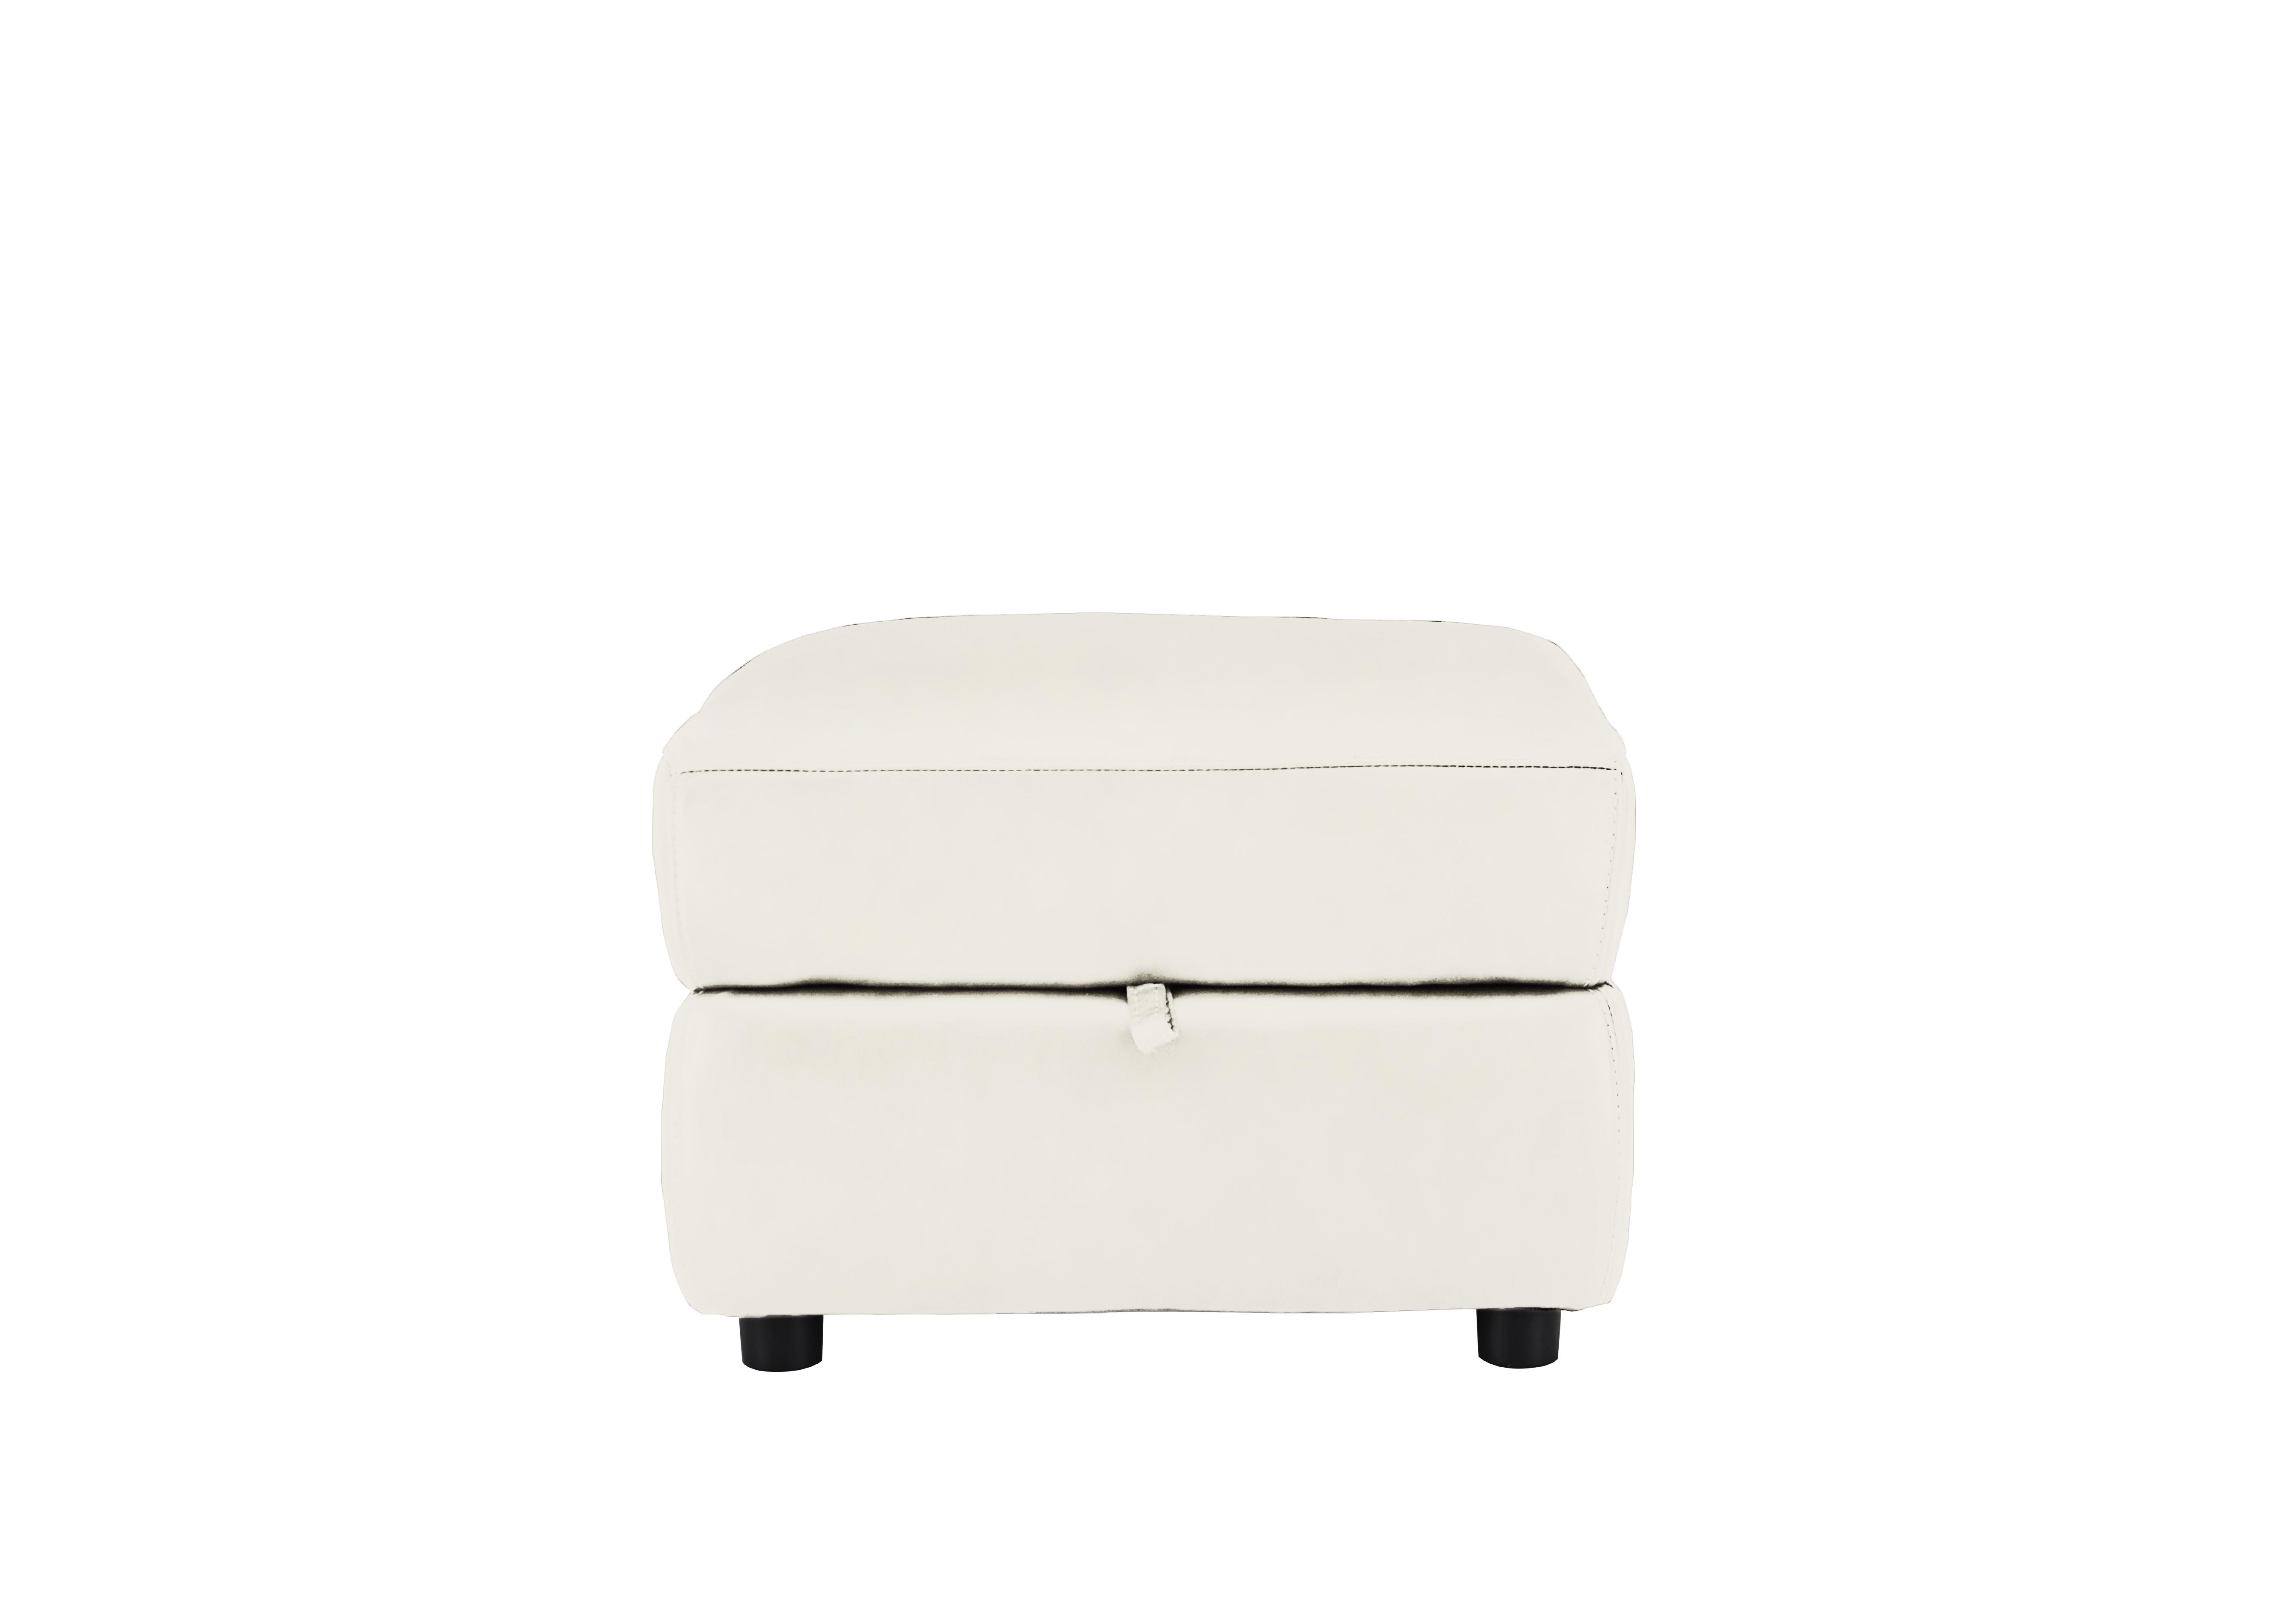 Relax Station Revive Leather Storage Footstool in Bv-744d Star White on Furniture Village